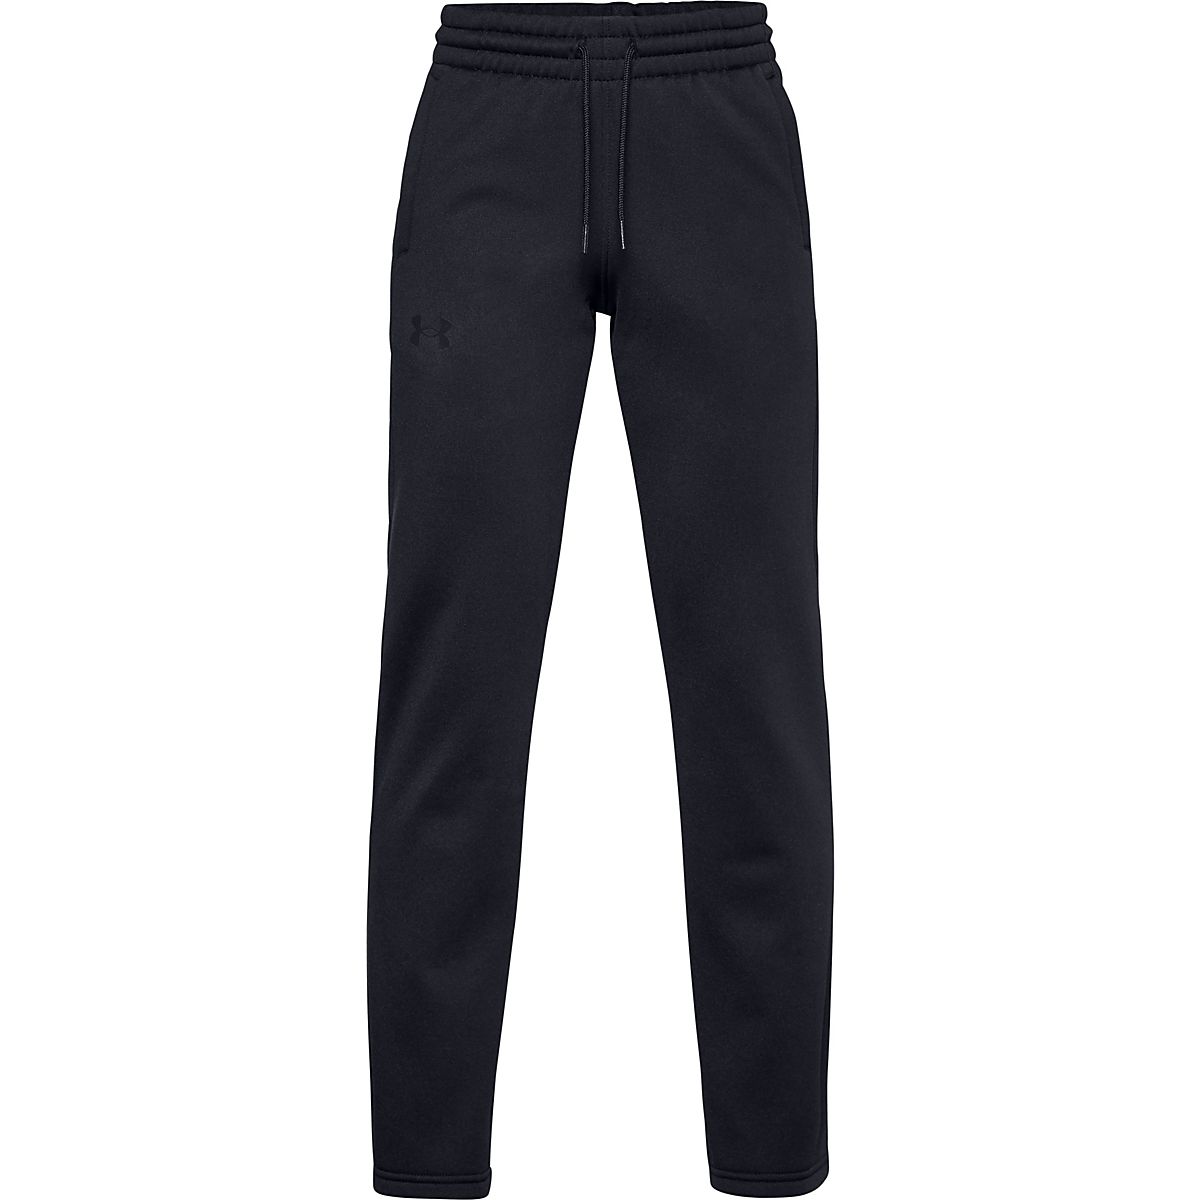 Boys Pants  Chinos, Trousers & Joggers – Academy Brand